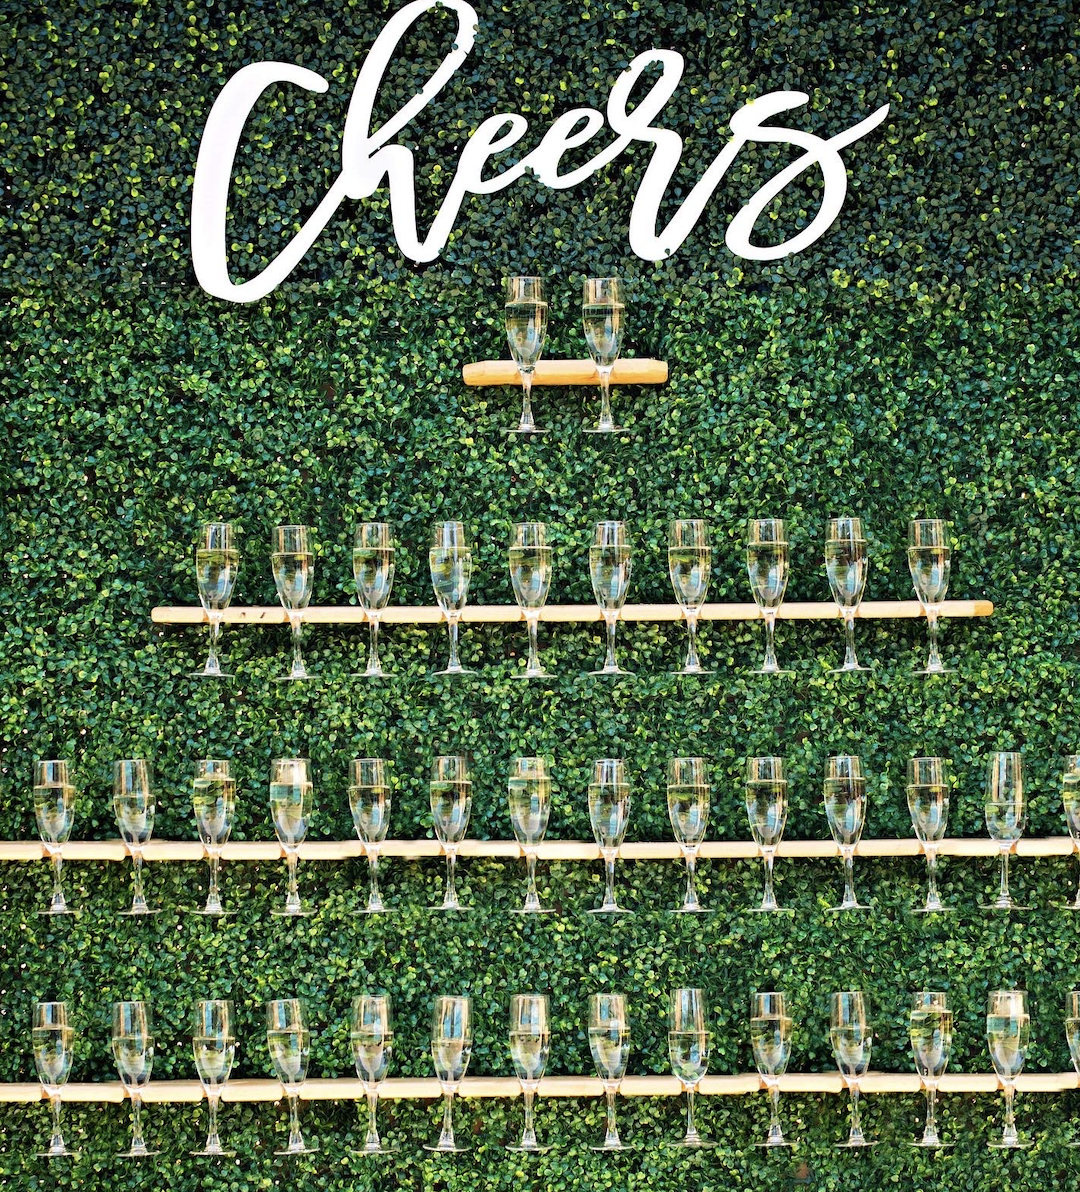 Green wall with 3 rows of shelves holding champagne glasses with the words 'cheers' on a vintage mobile cart